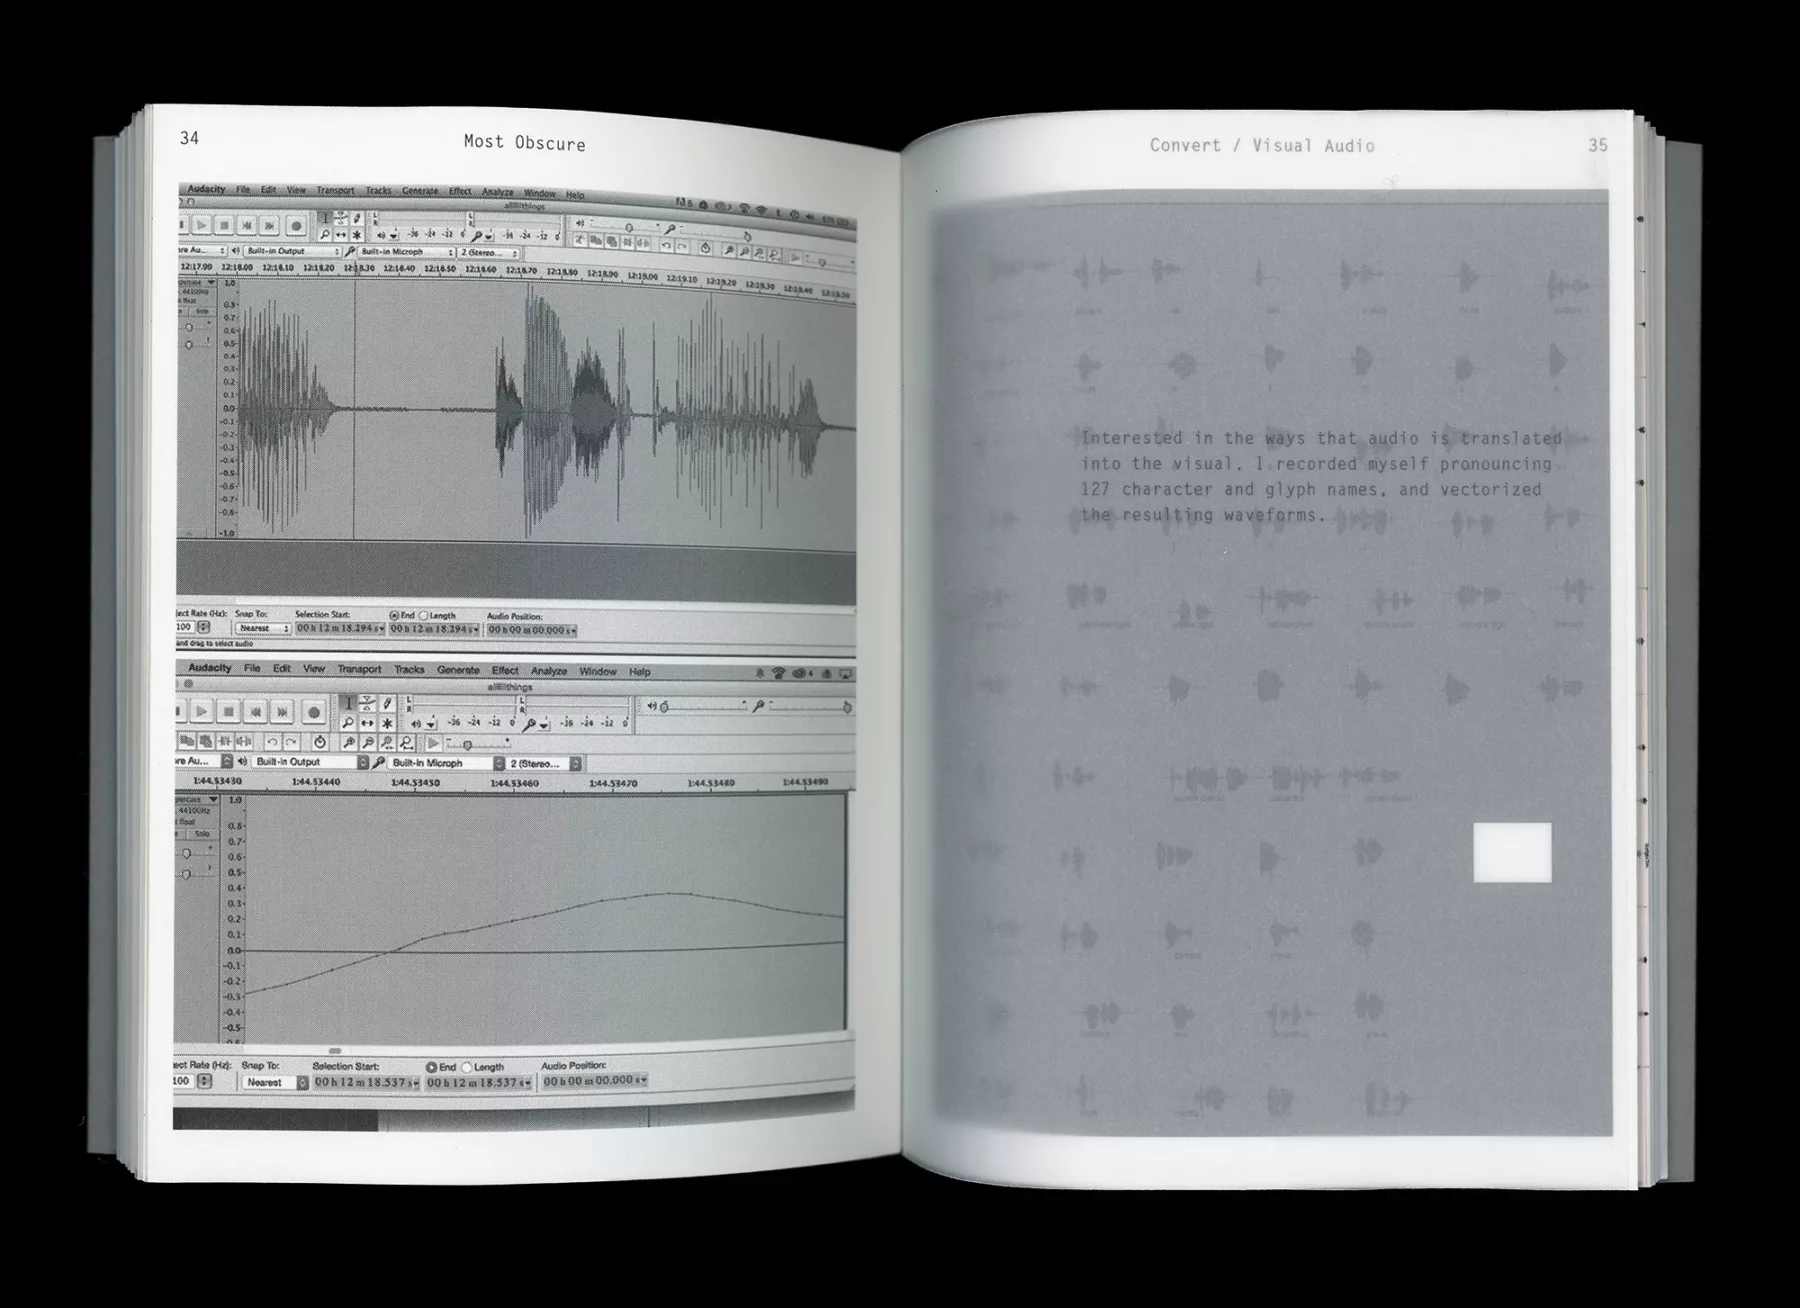 Spread of 'Most Obscure' book showing waveforms of vocalized characters.